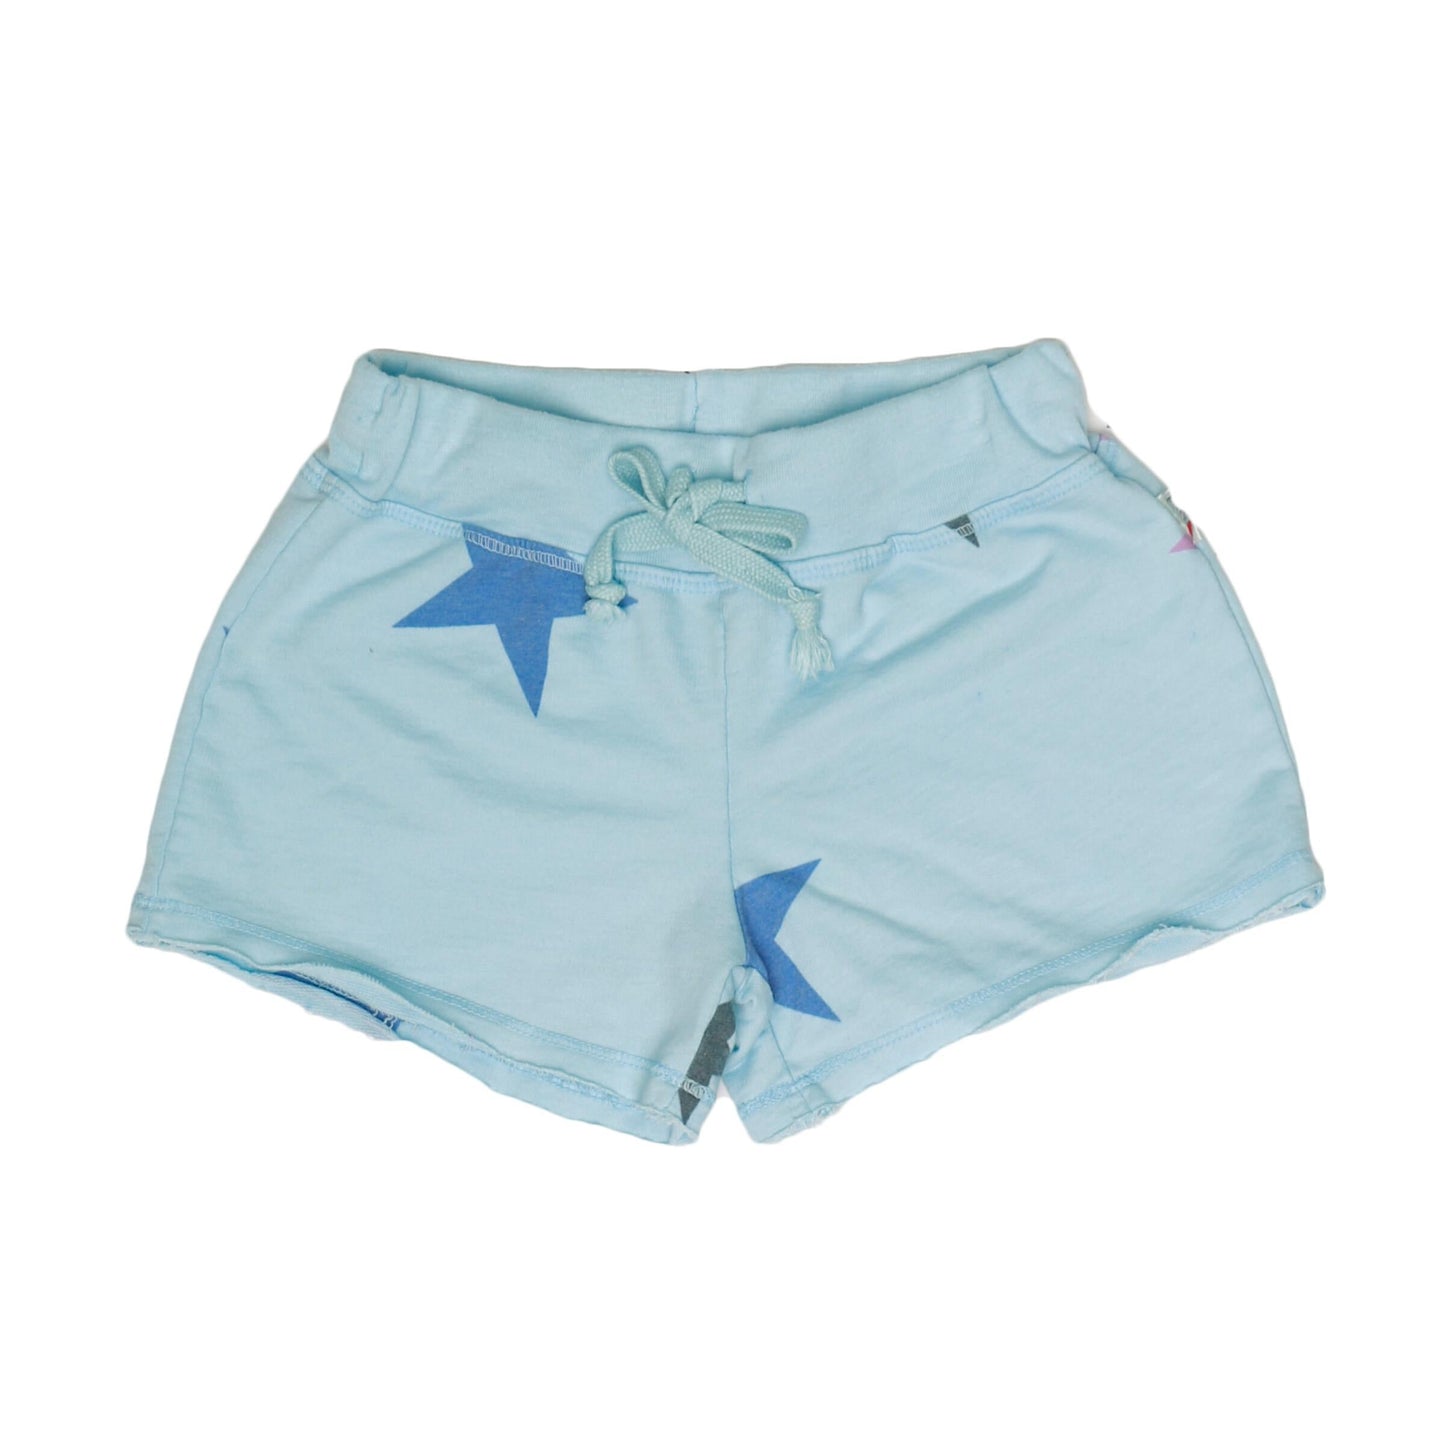 Colored-Stars Raw-Edged Shorts with Back Pocket